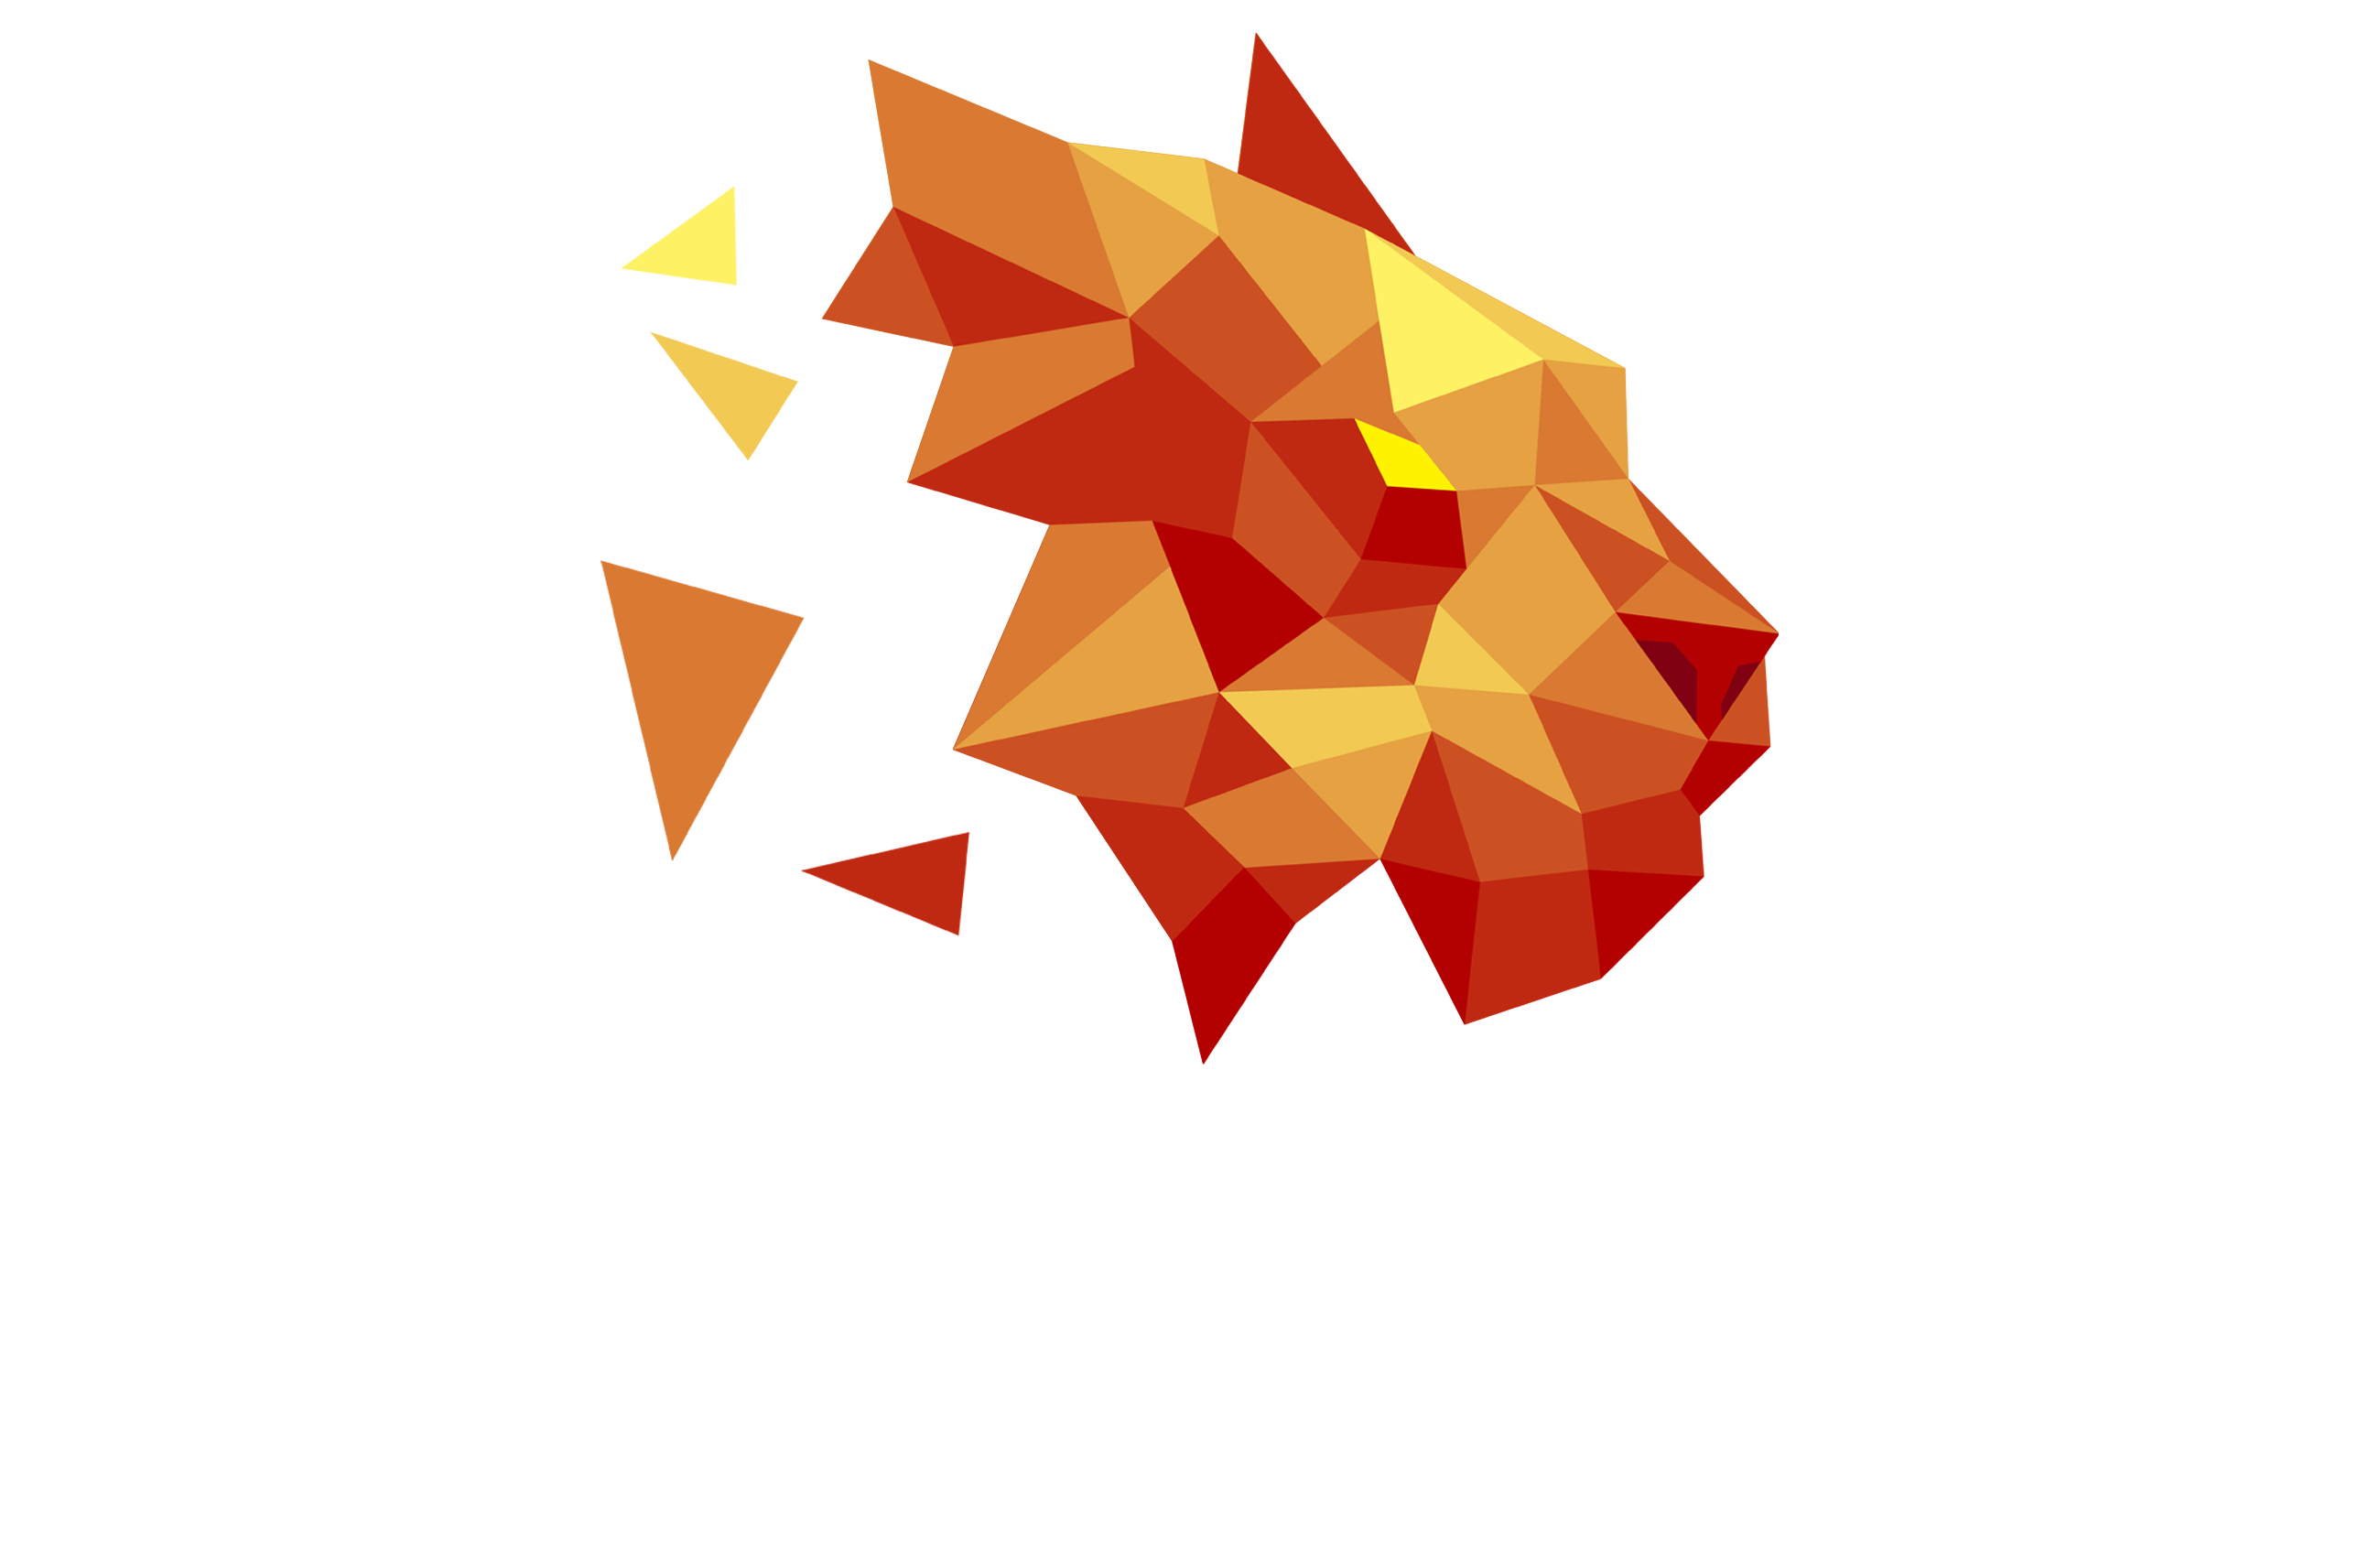 Jaded Lusion Productions